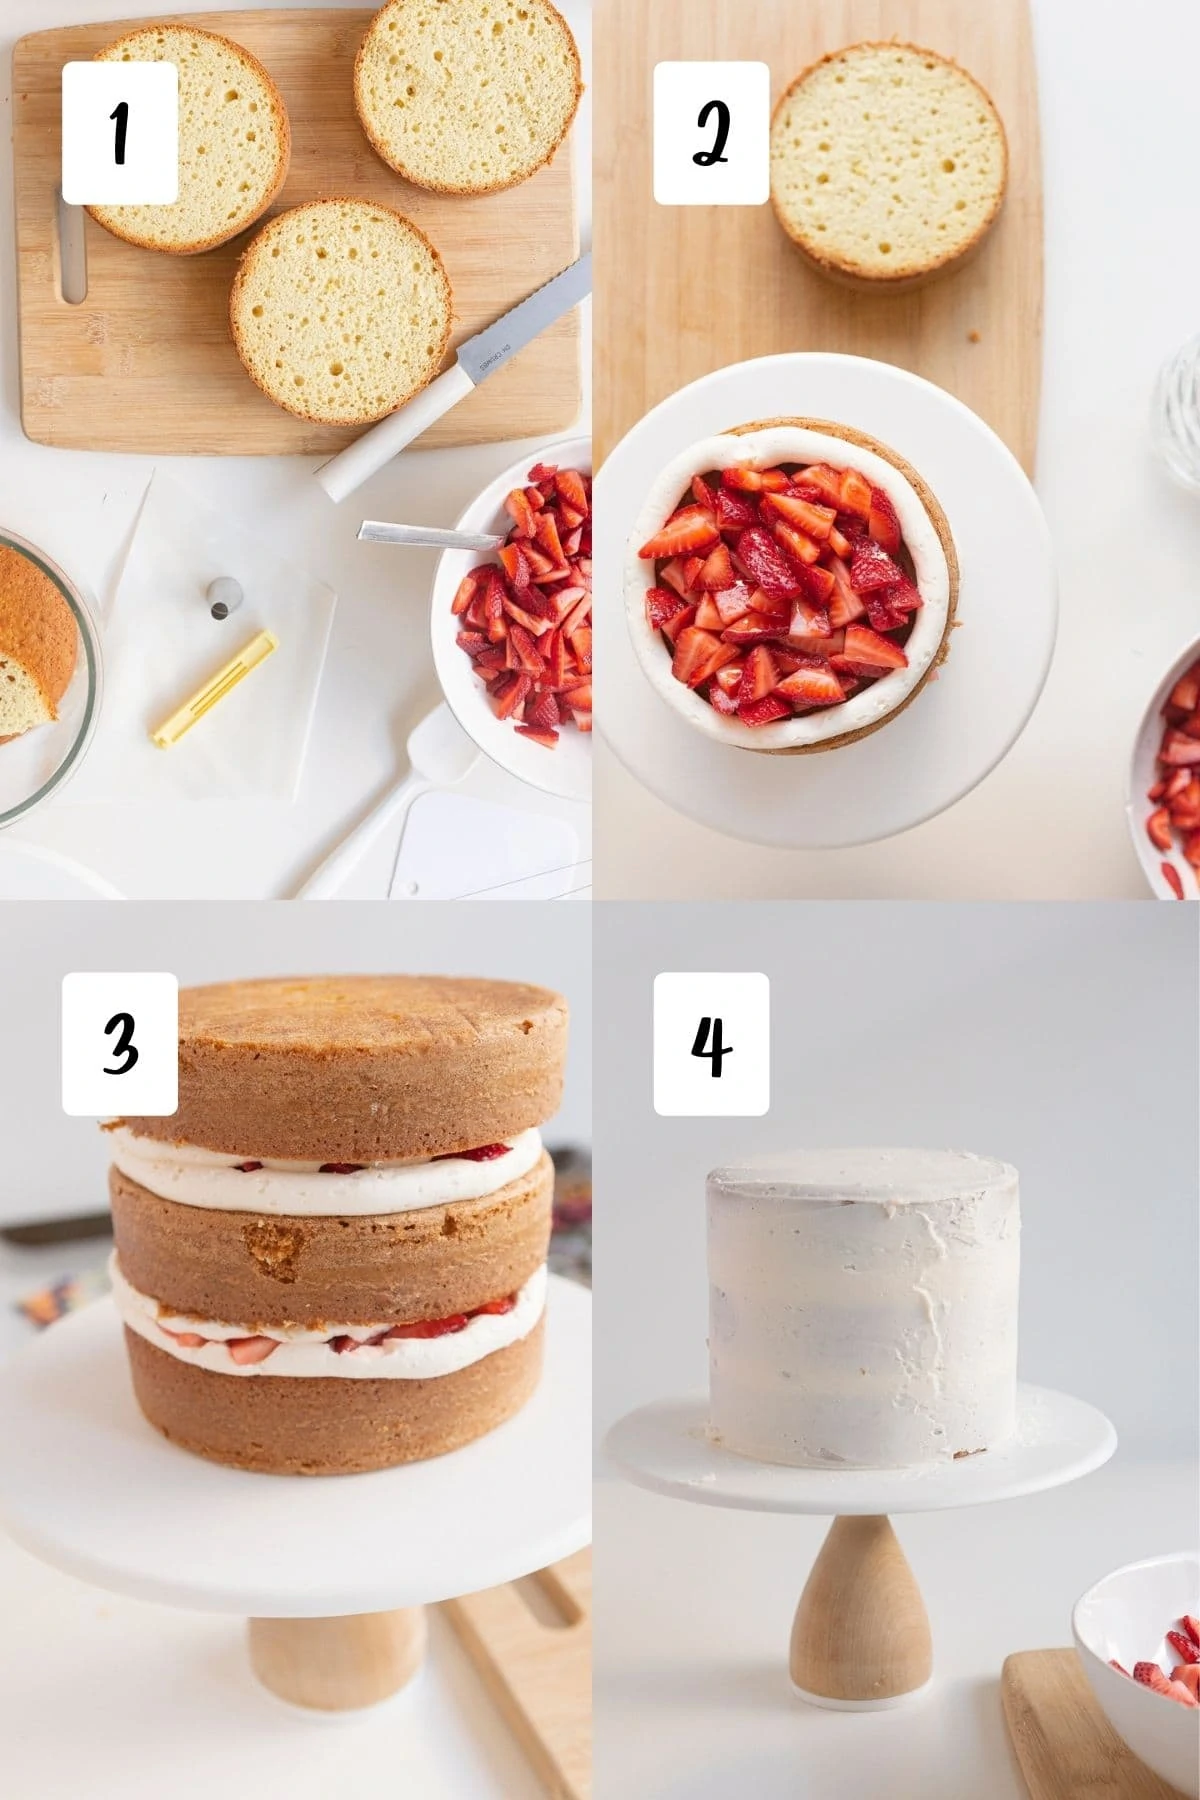 steps for assembling cake layers into a full cake